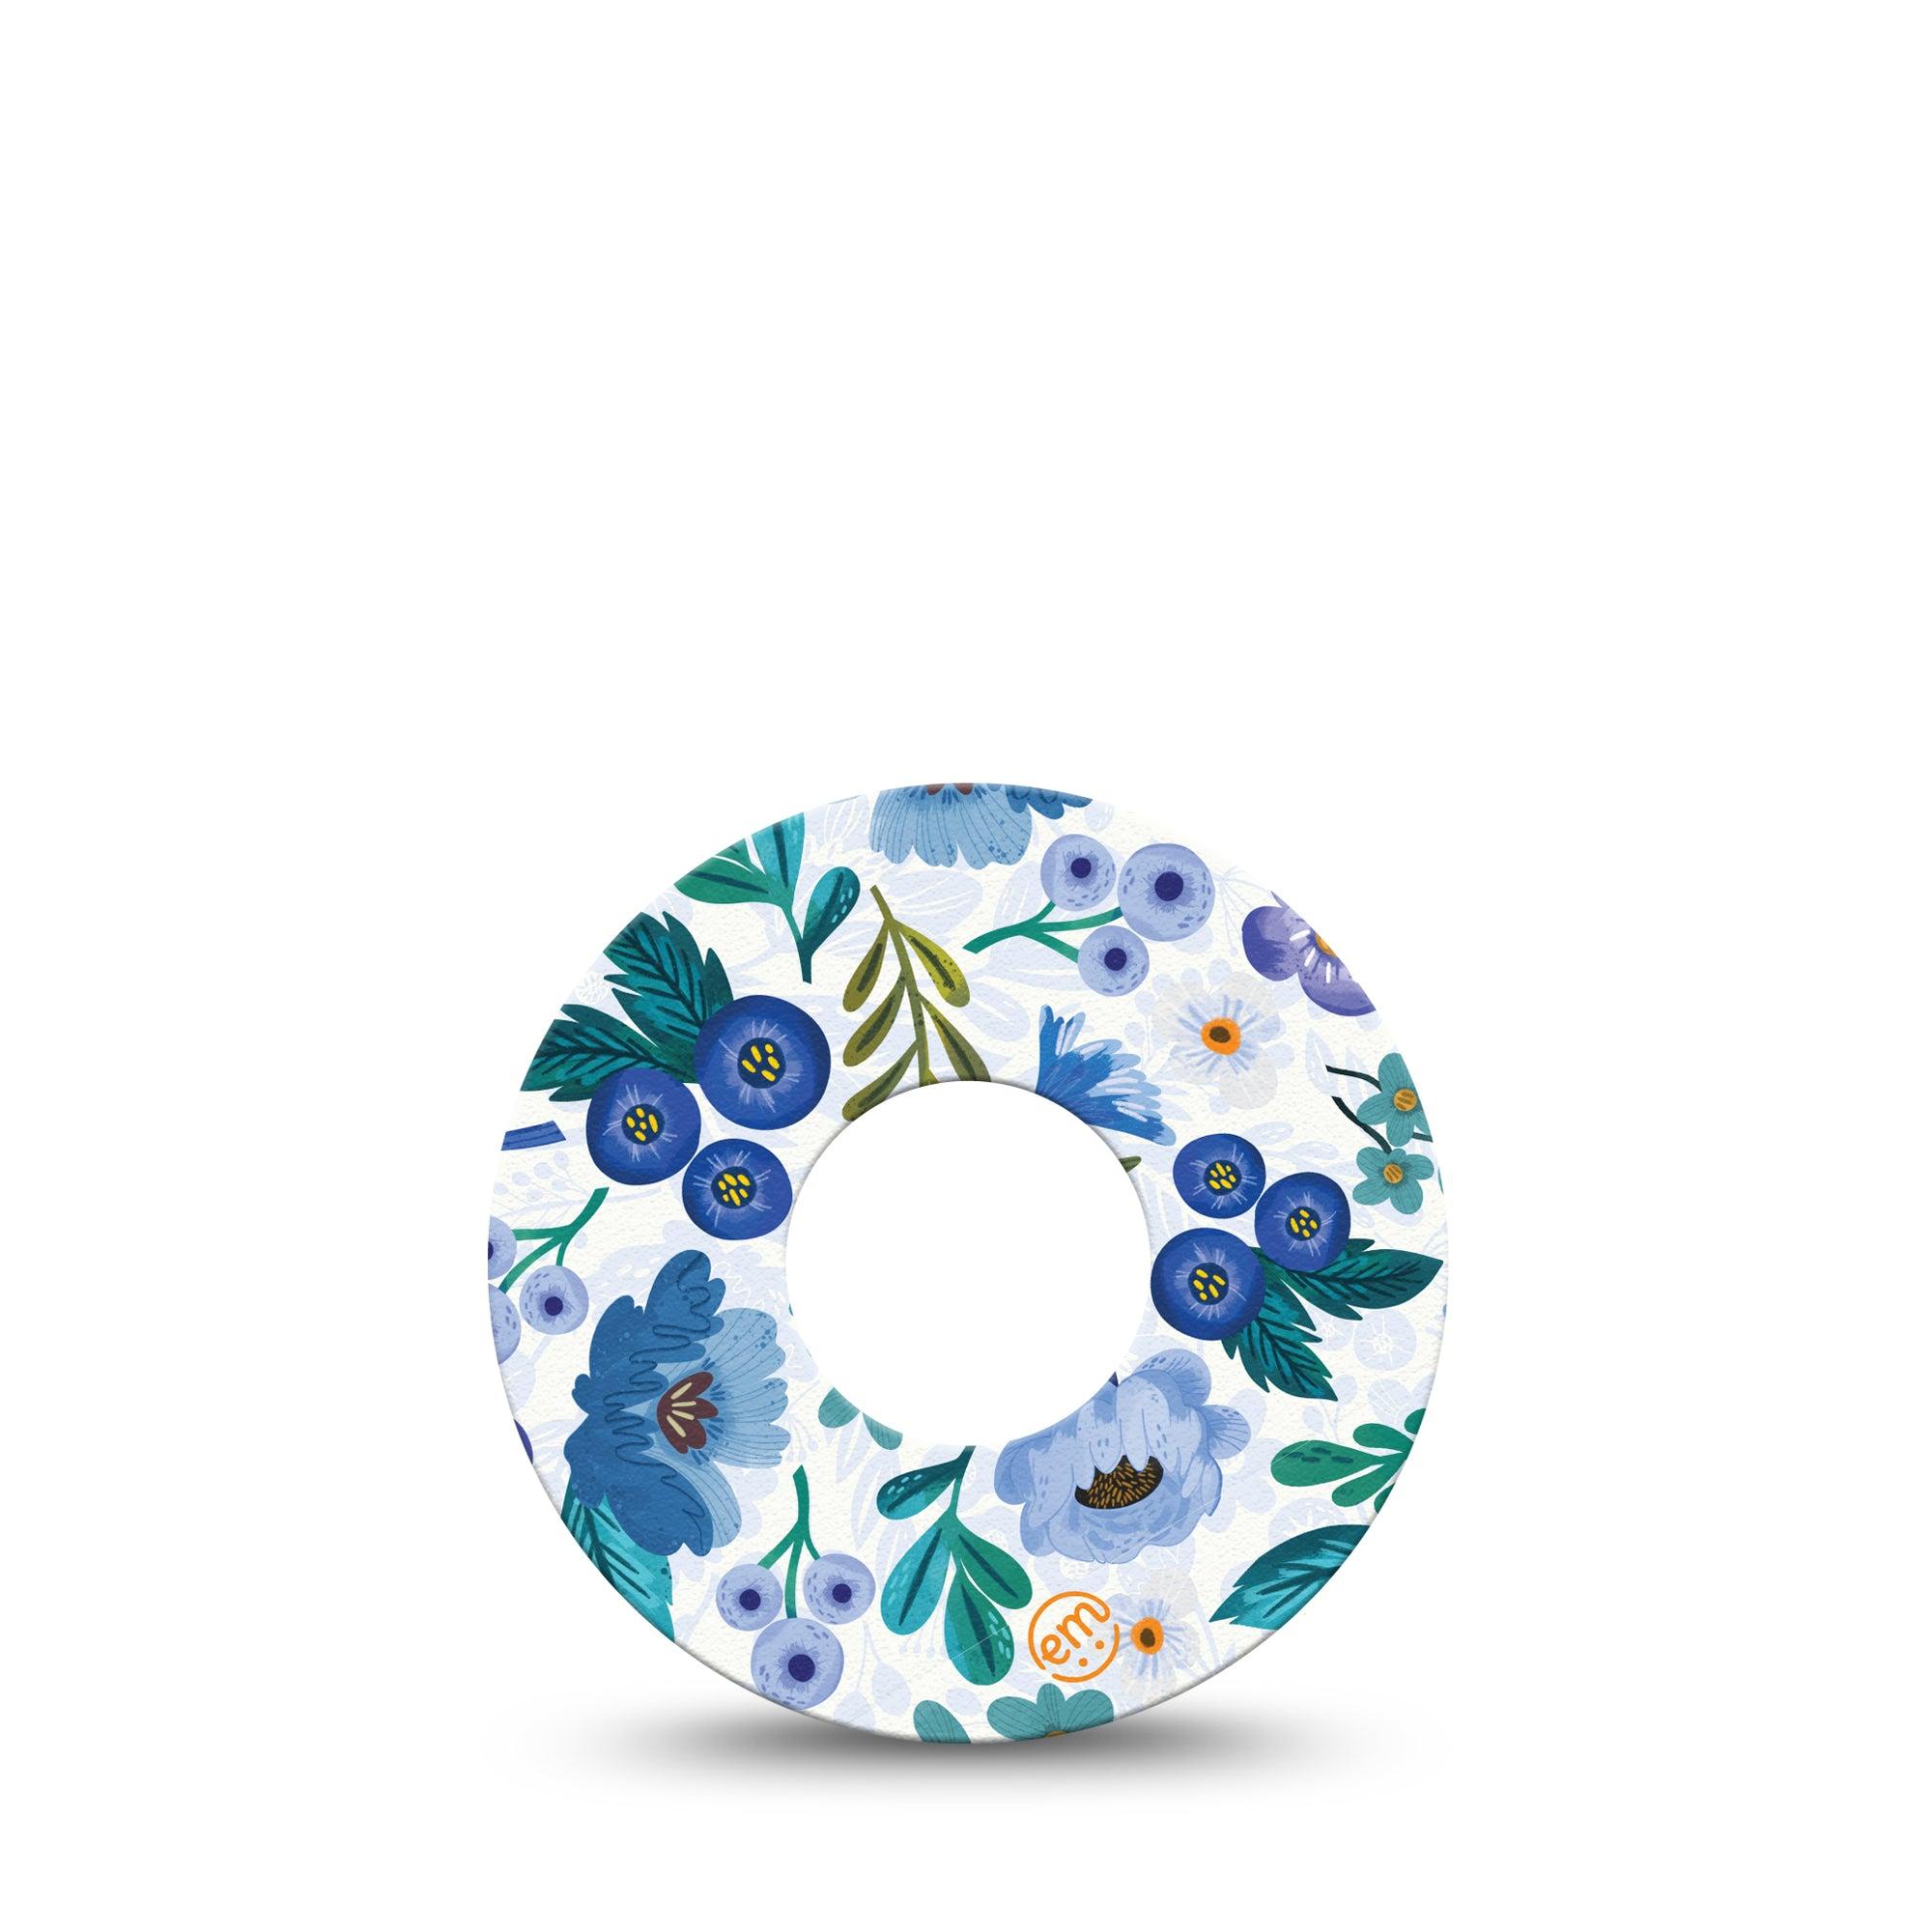 ExpressionMed Blue Anemone Infusion Set Tape, 5-Pack, Blooming Florals Themed, Overlay Patch Design